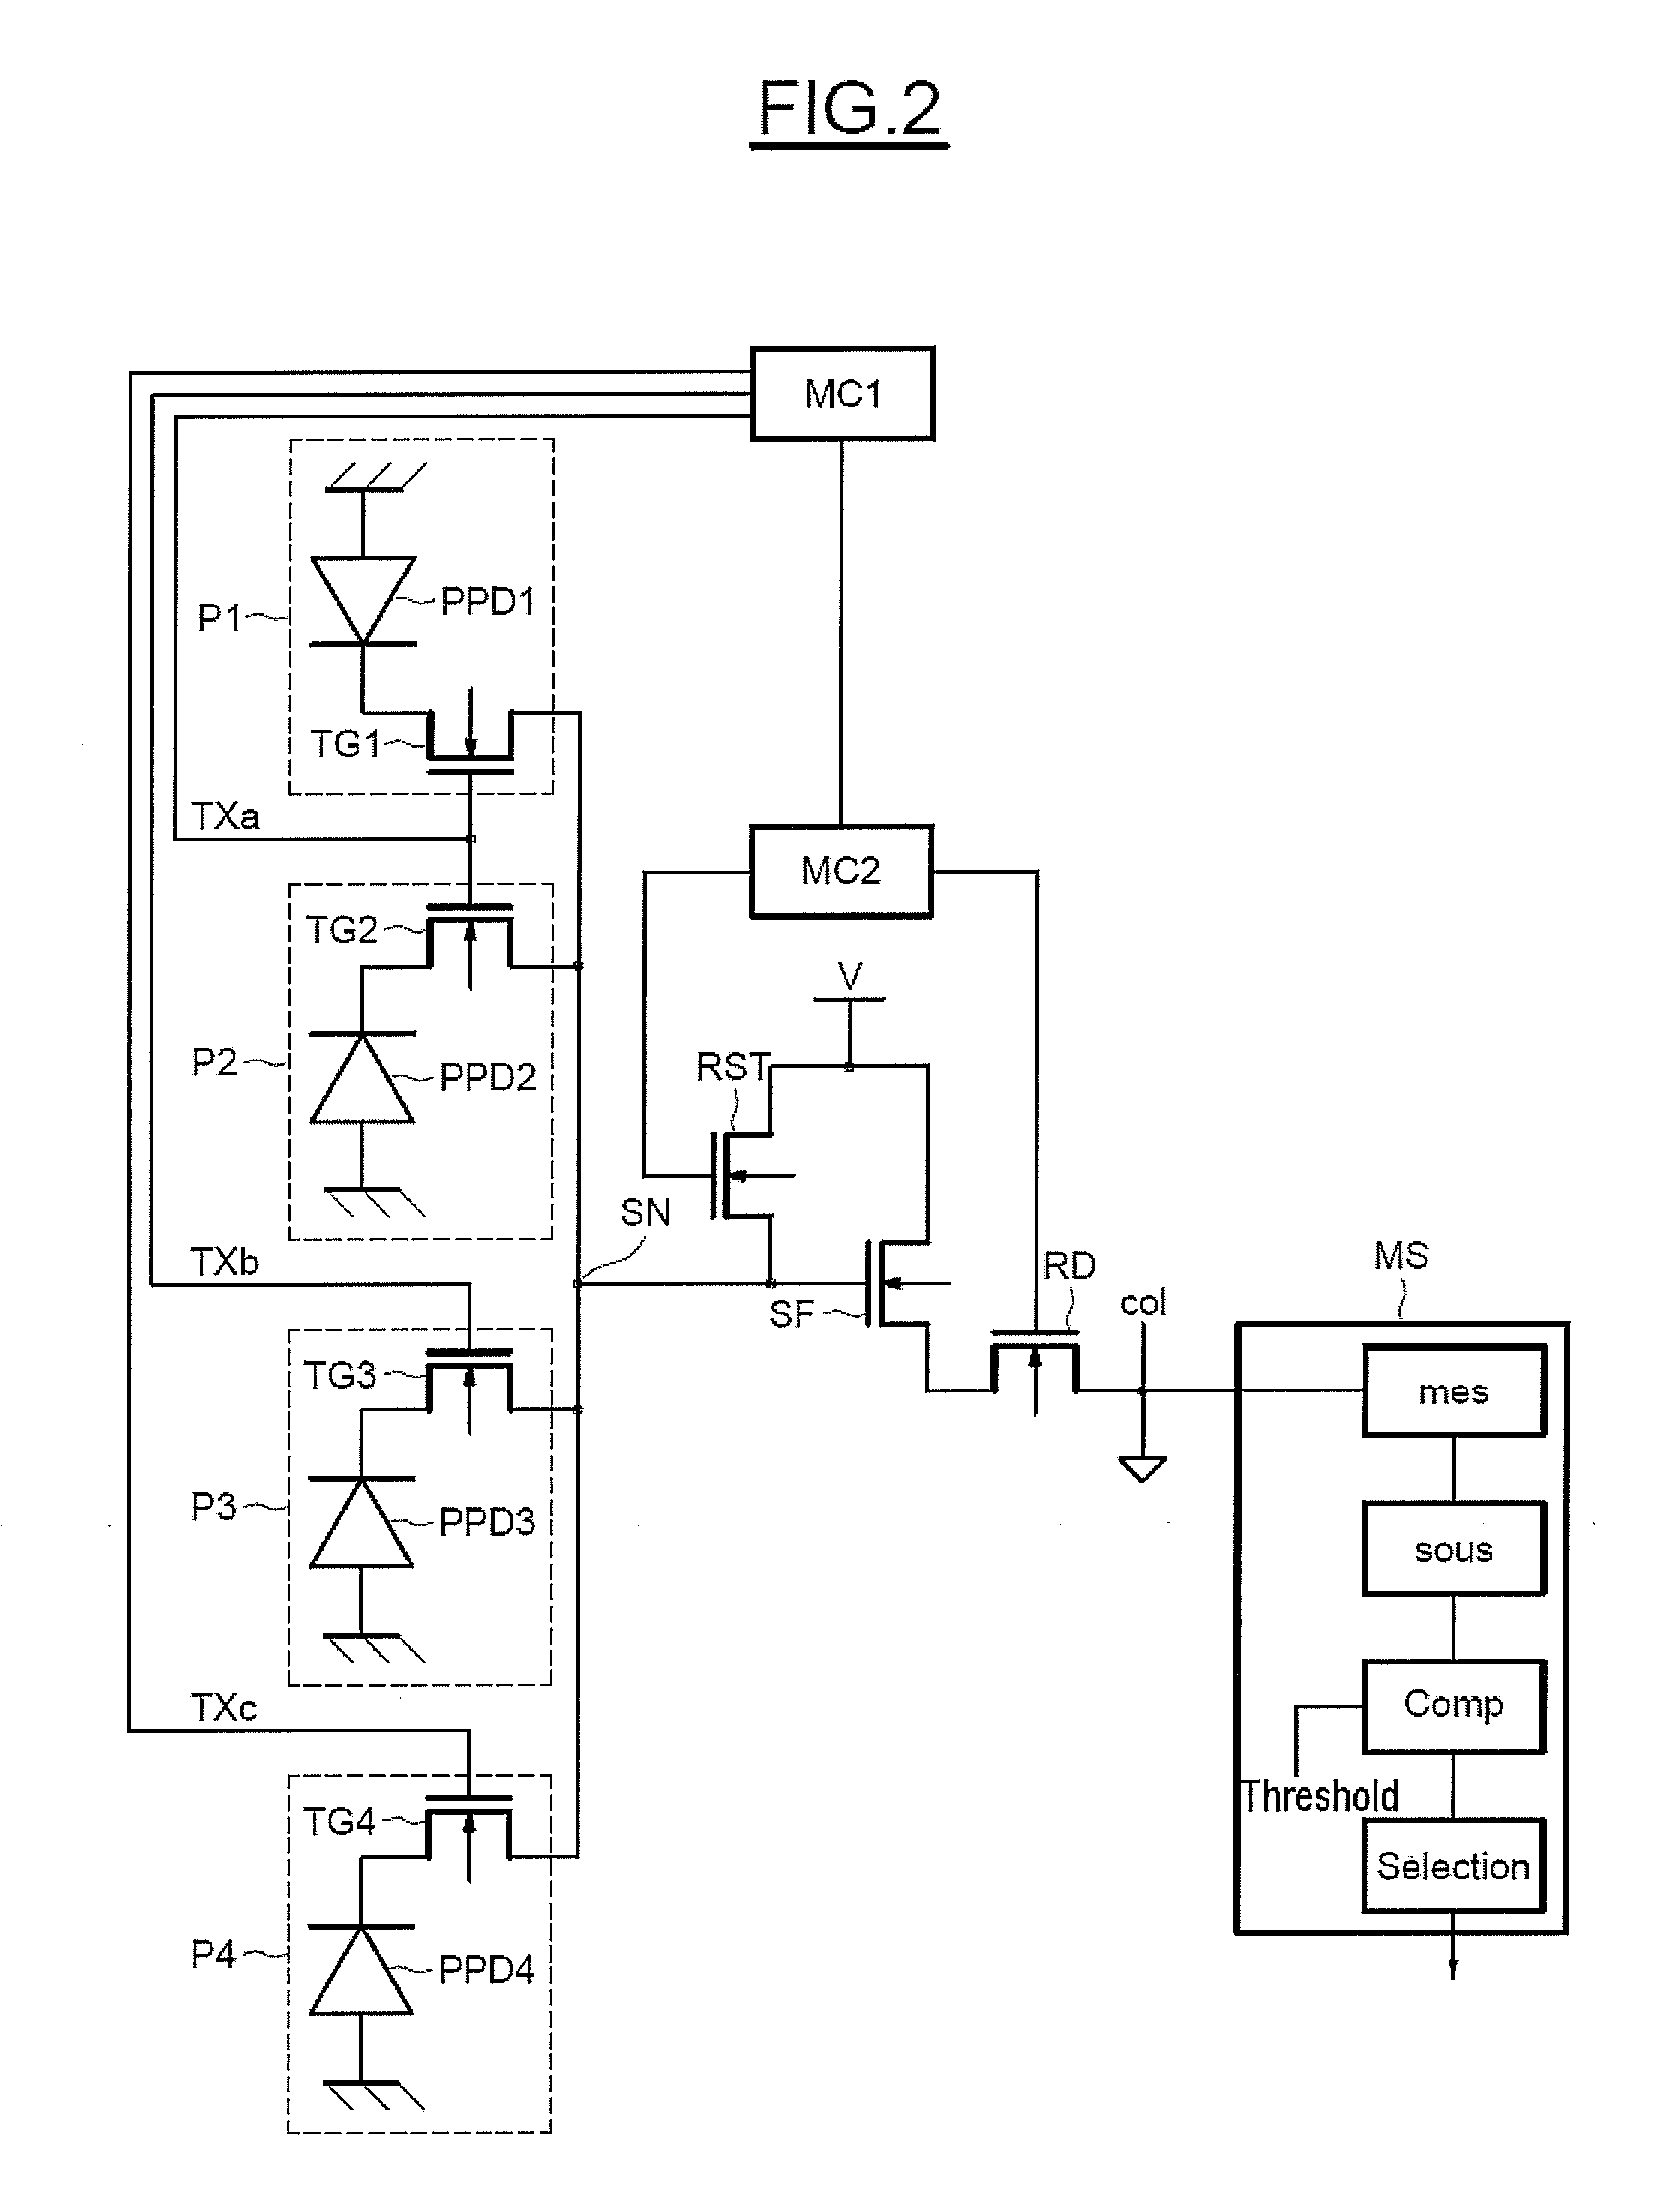 Matrix imaging device comprising at least one set of photosites with multiple integration times